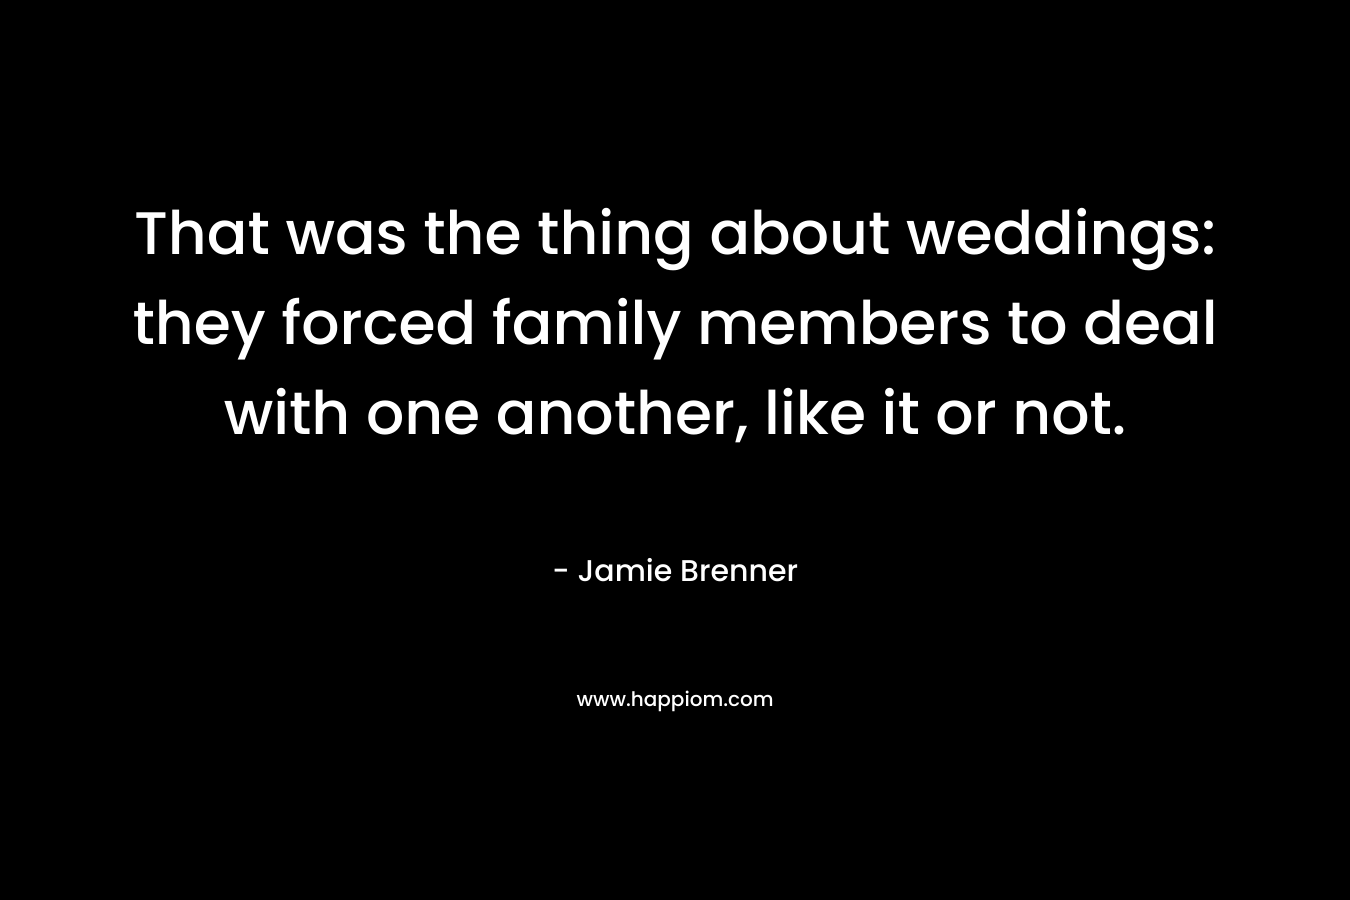 That was the thing about weddings: they forced family members to deal with one another, like it or not. – Jamie Brenner